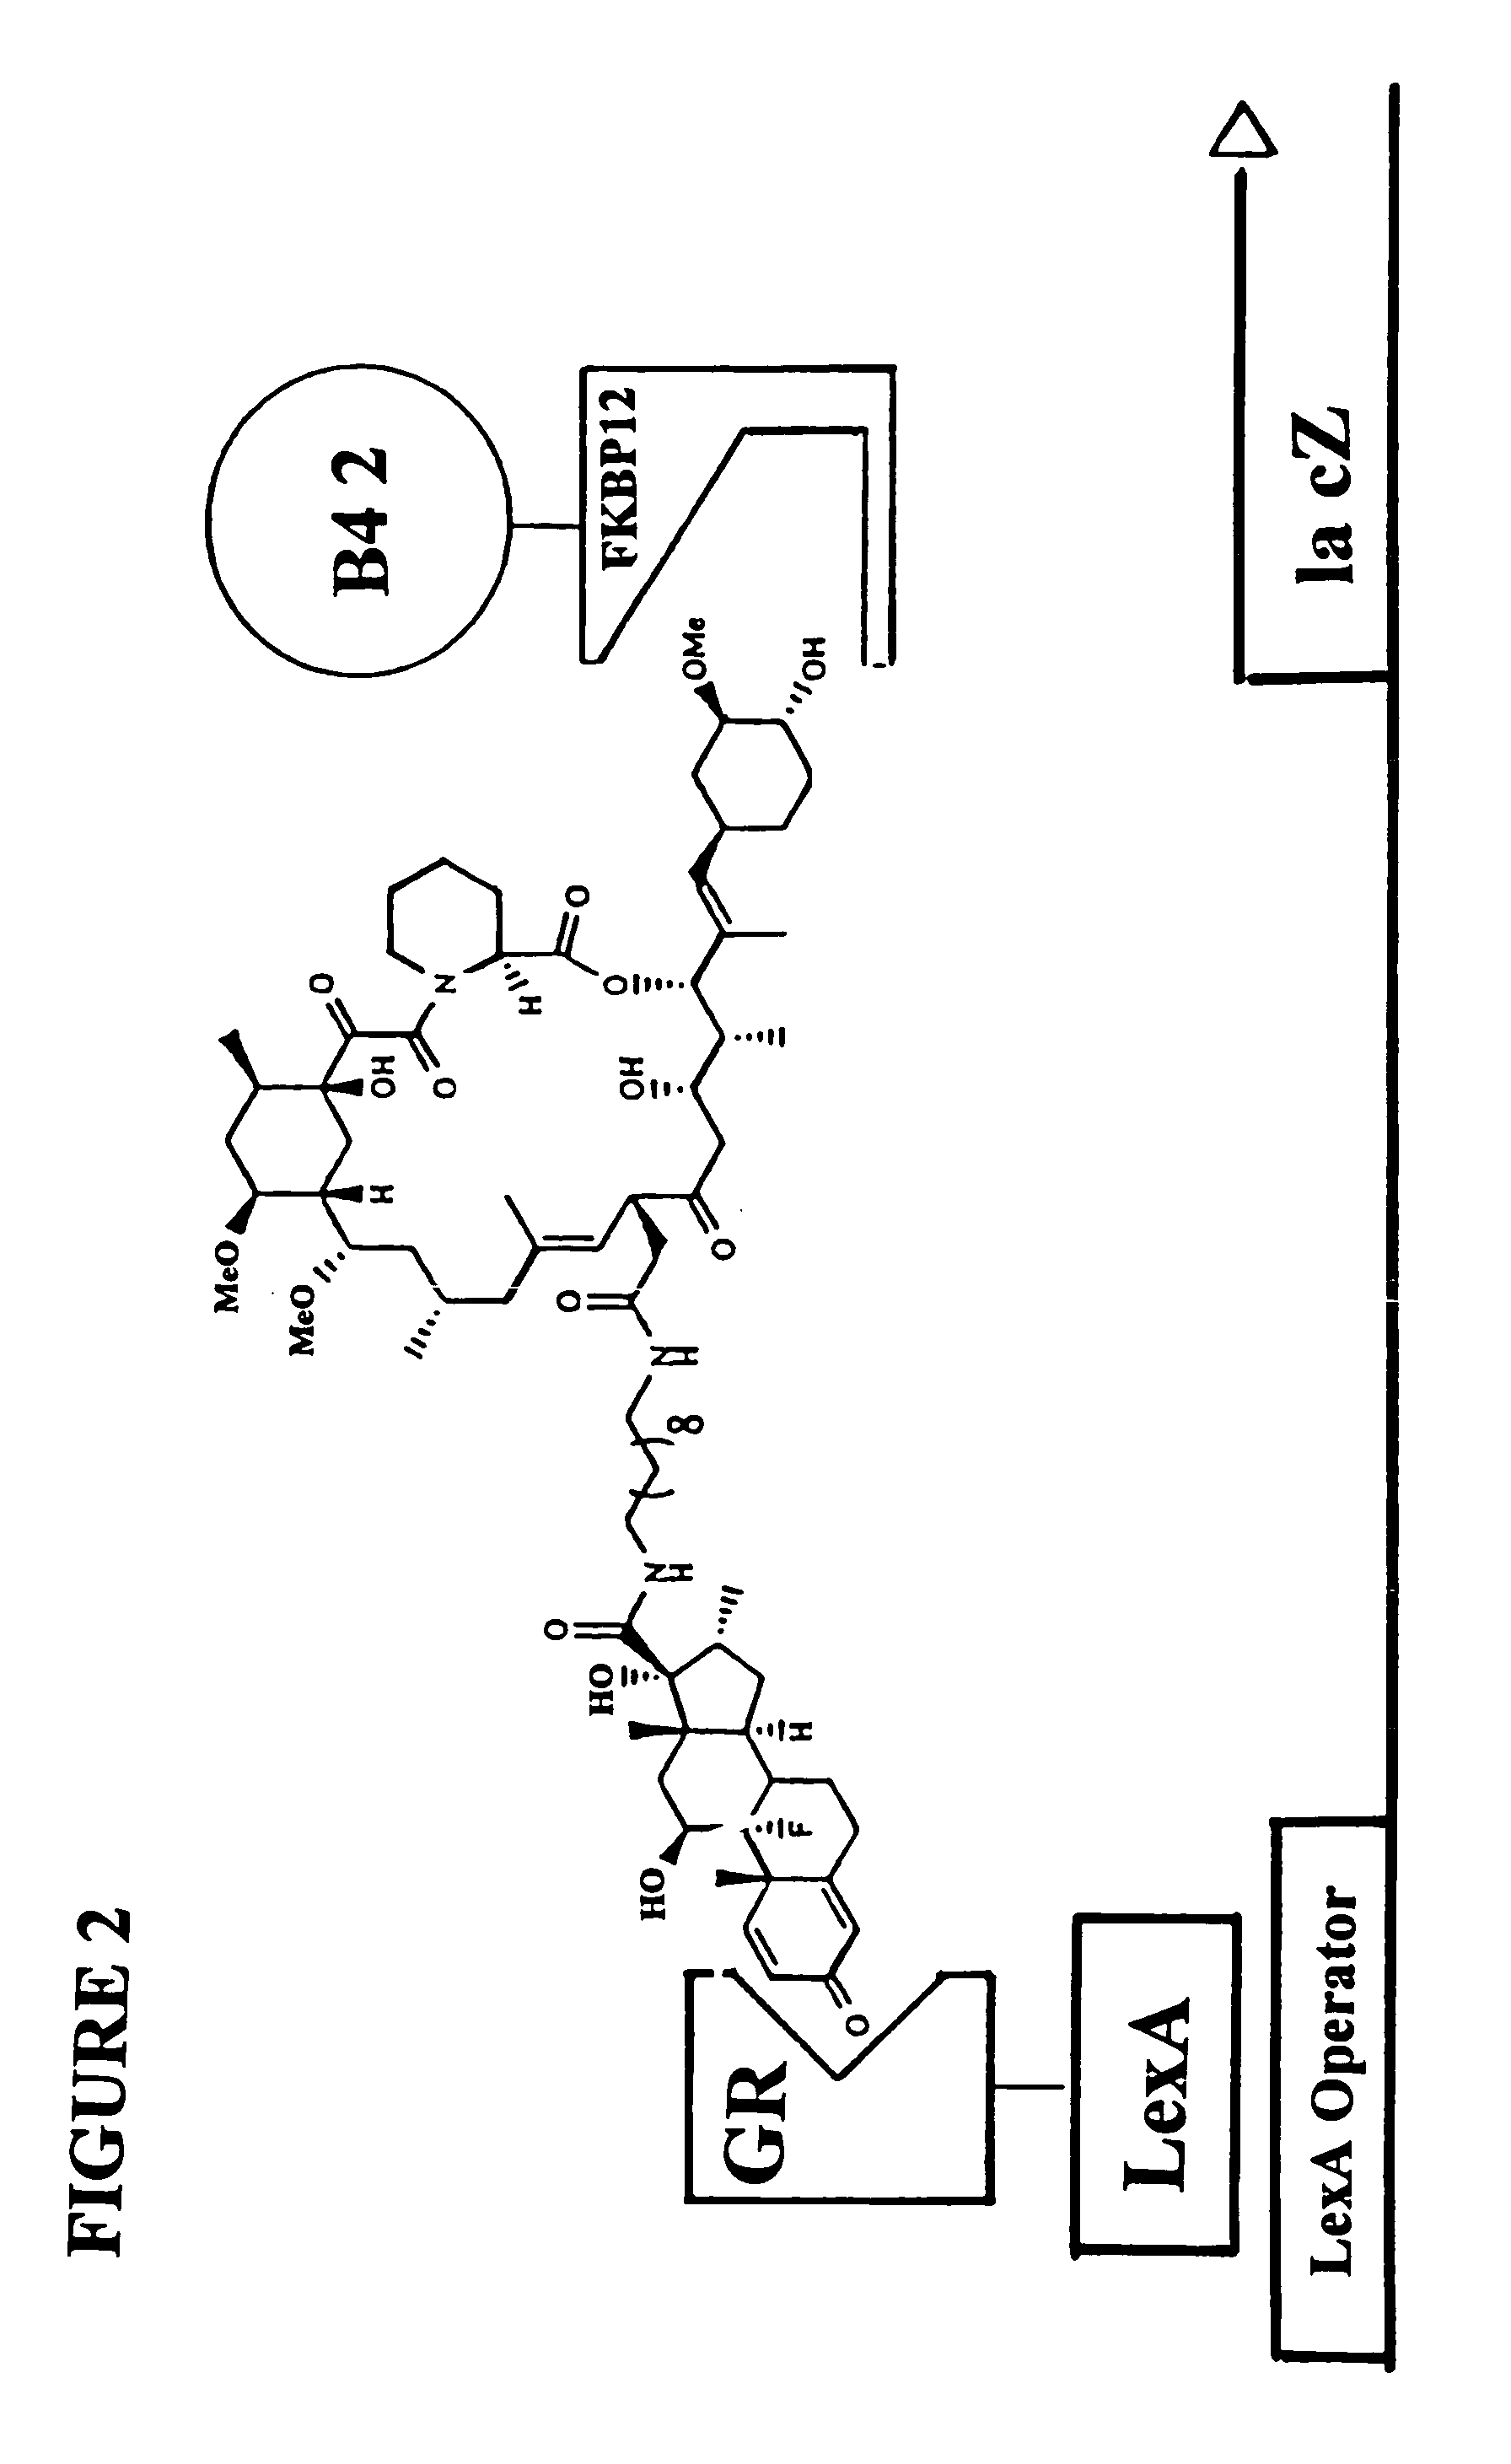 Methods and assays for screening protein targets